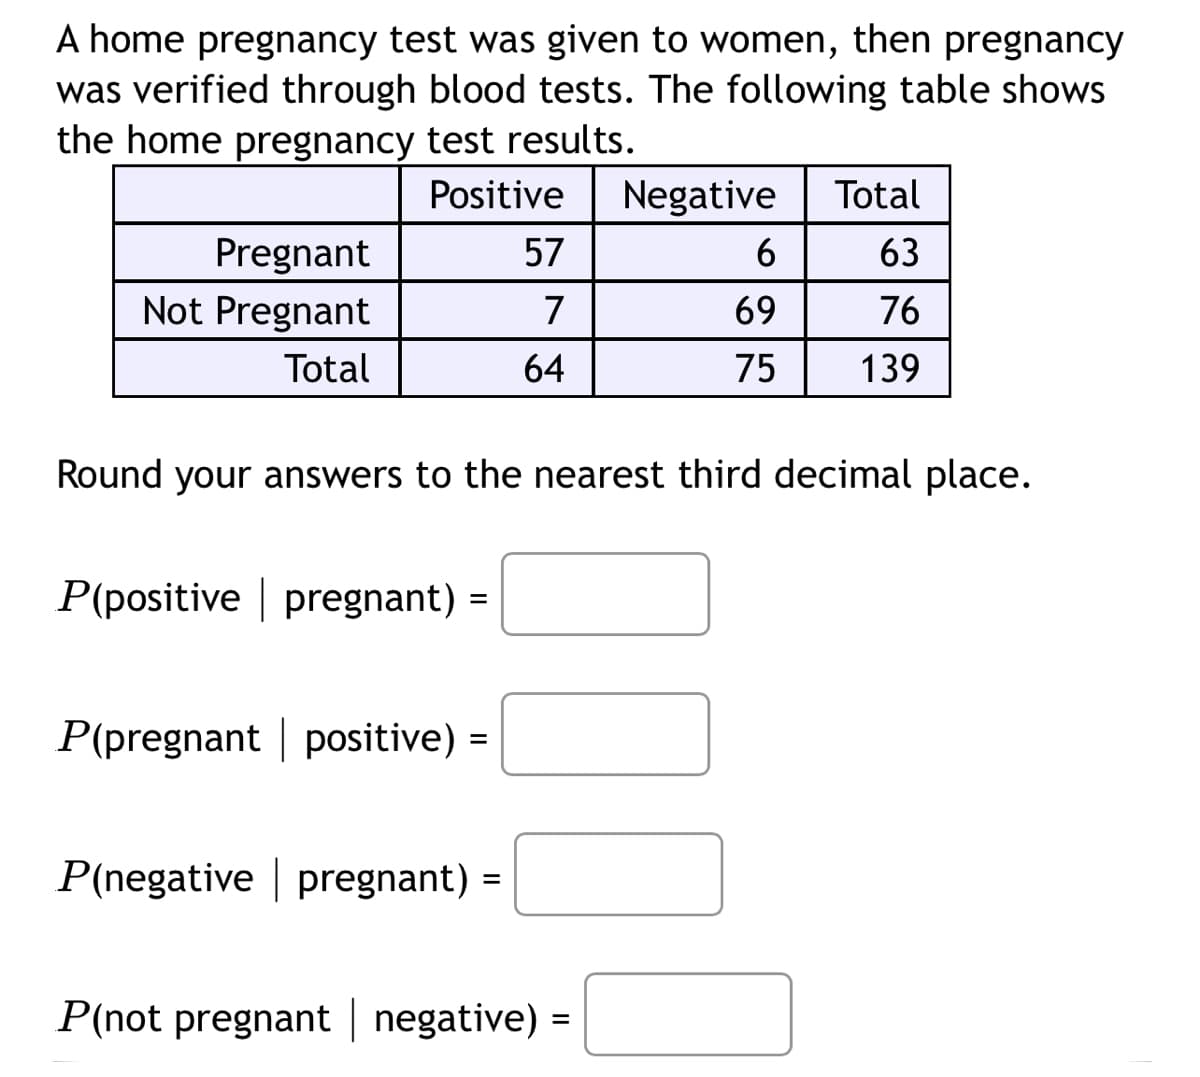 A home pregnancy test was given to women, then pregnancy
was verified through blood tests. The following table shows
the home pregnancy test results.
Positive
Pregnant
Not Pregnant
Total
P(positive pregnant) =
P(pregnant positive) =
57
7
64
Round your answers to the nearest third decimal place.
P(negative pregnant) =
Negative
6
69
75
P(not pregnant | negative) =
Total
63
76
139